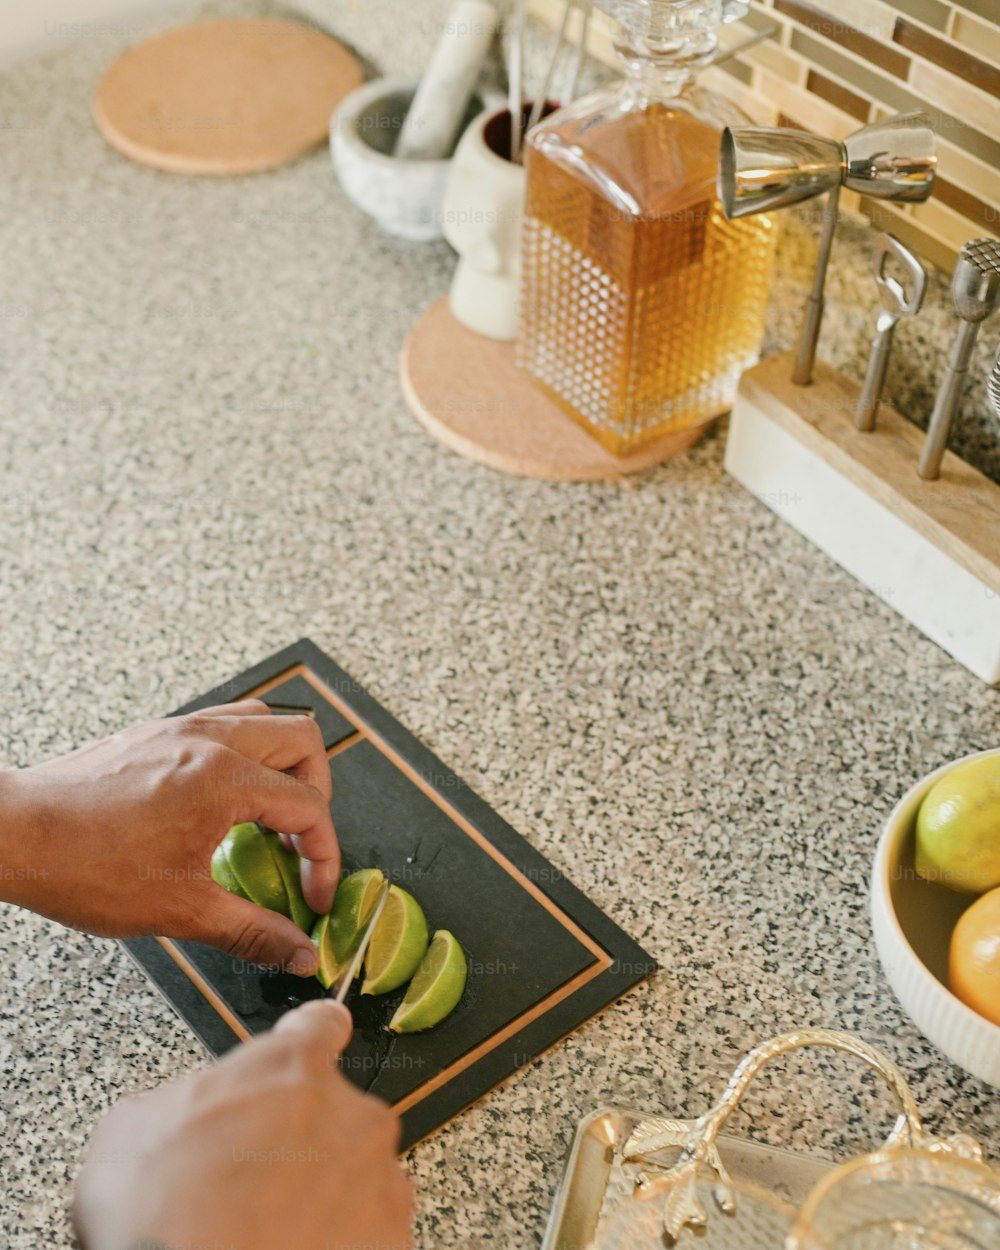 a person cutting limes on a cutting board